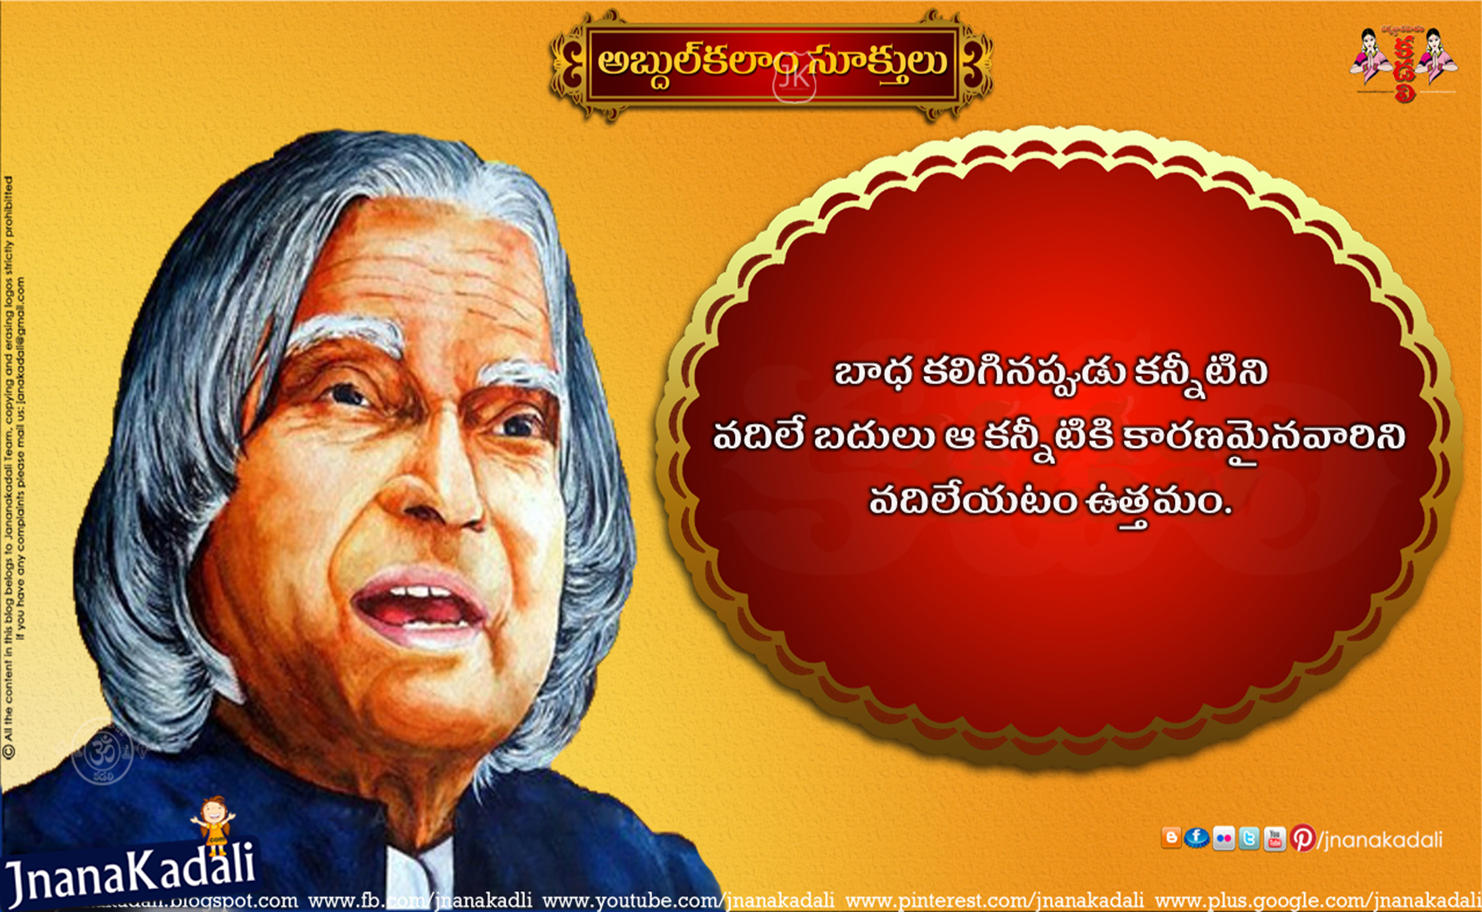 abdul kalam quotes for education